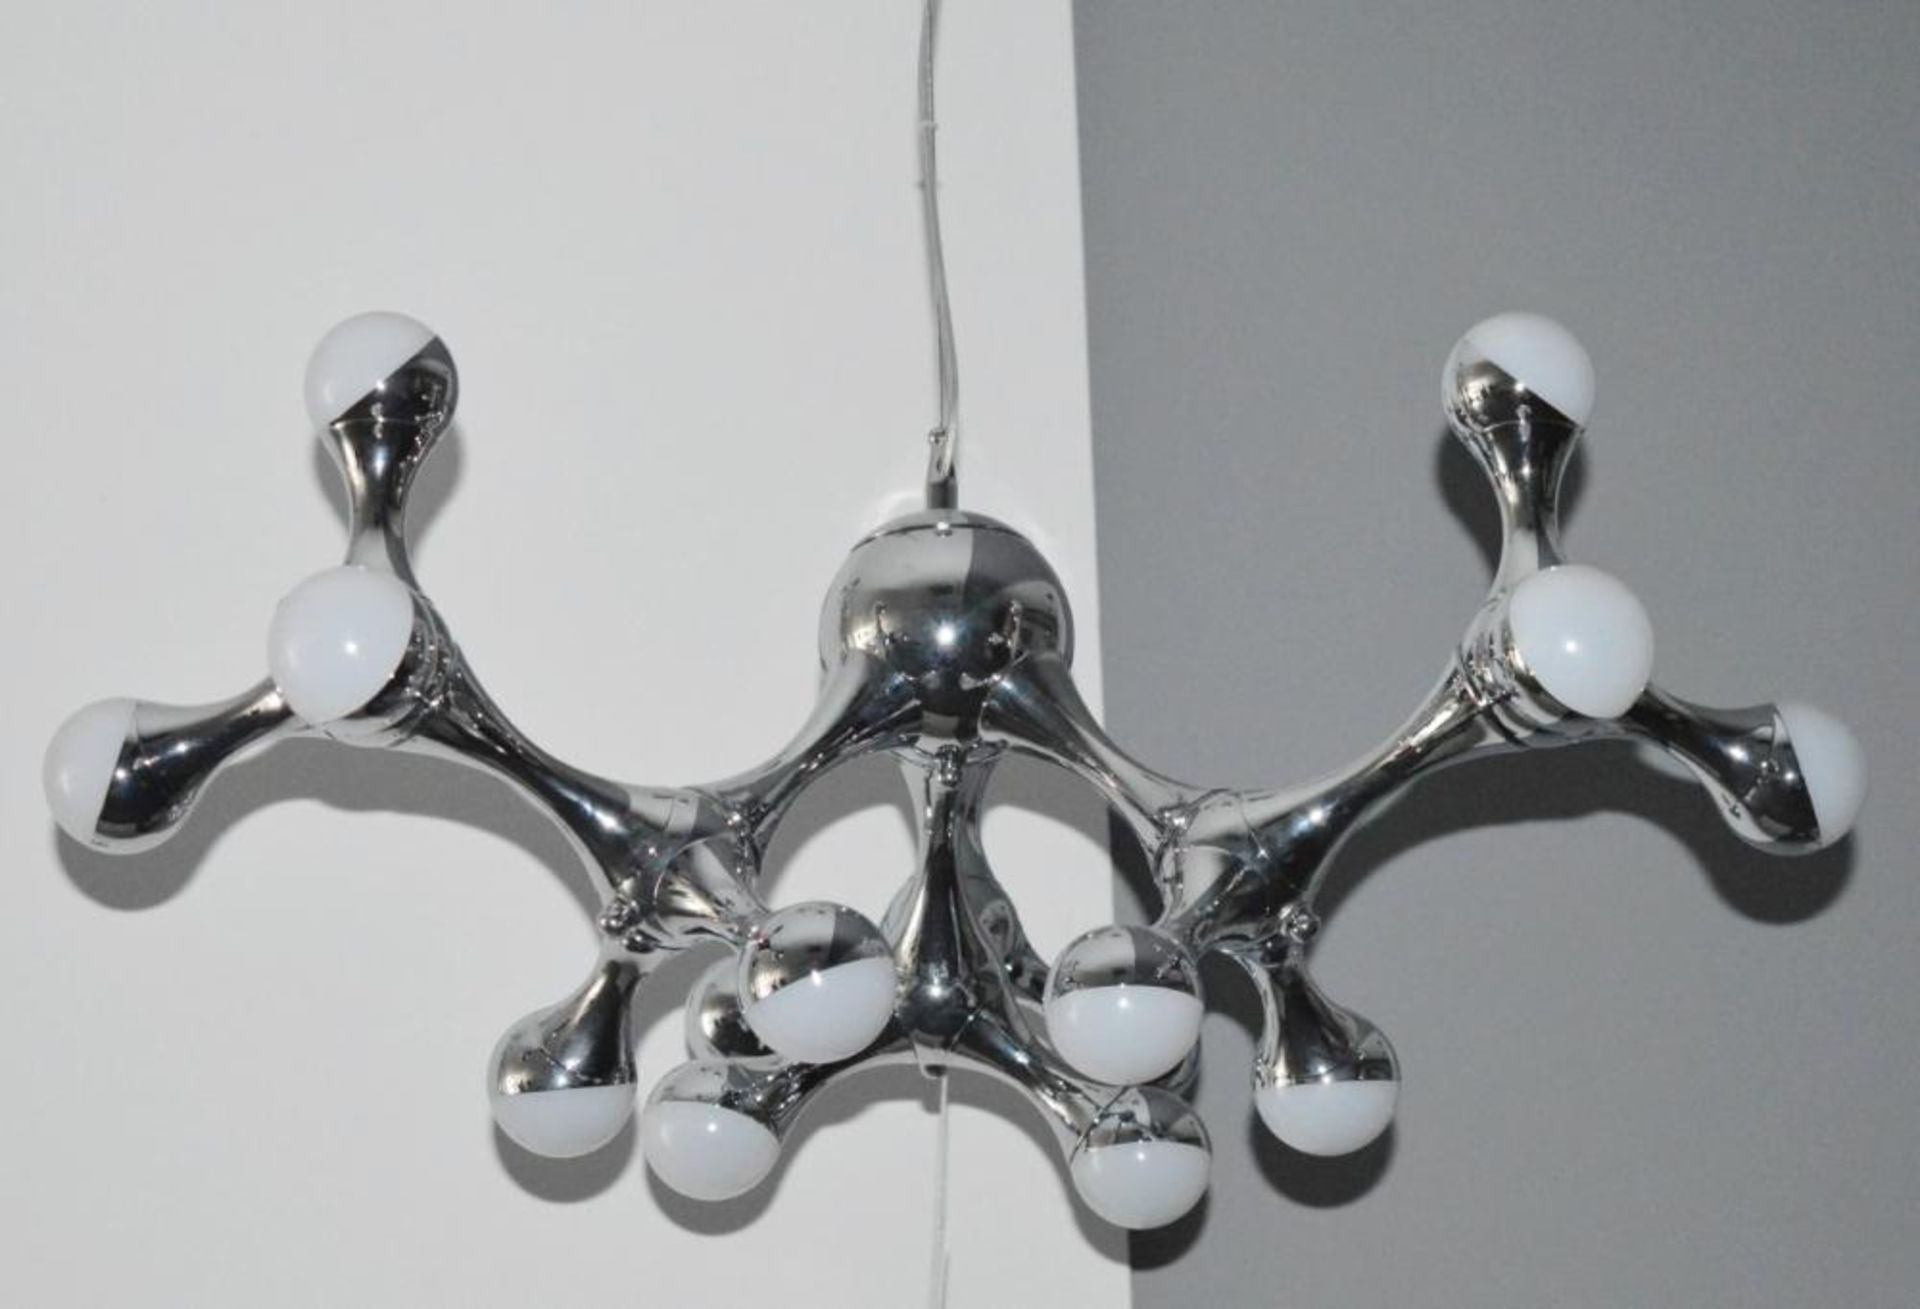 1 x DNA Chrome 15 LED Ceiling Light With Half Dome Shades - Contemporary European Design - Inspired - Image 3 of 6